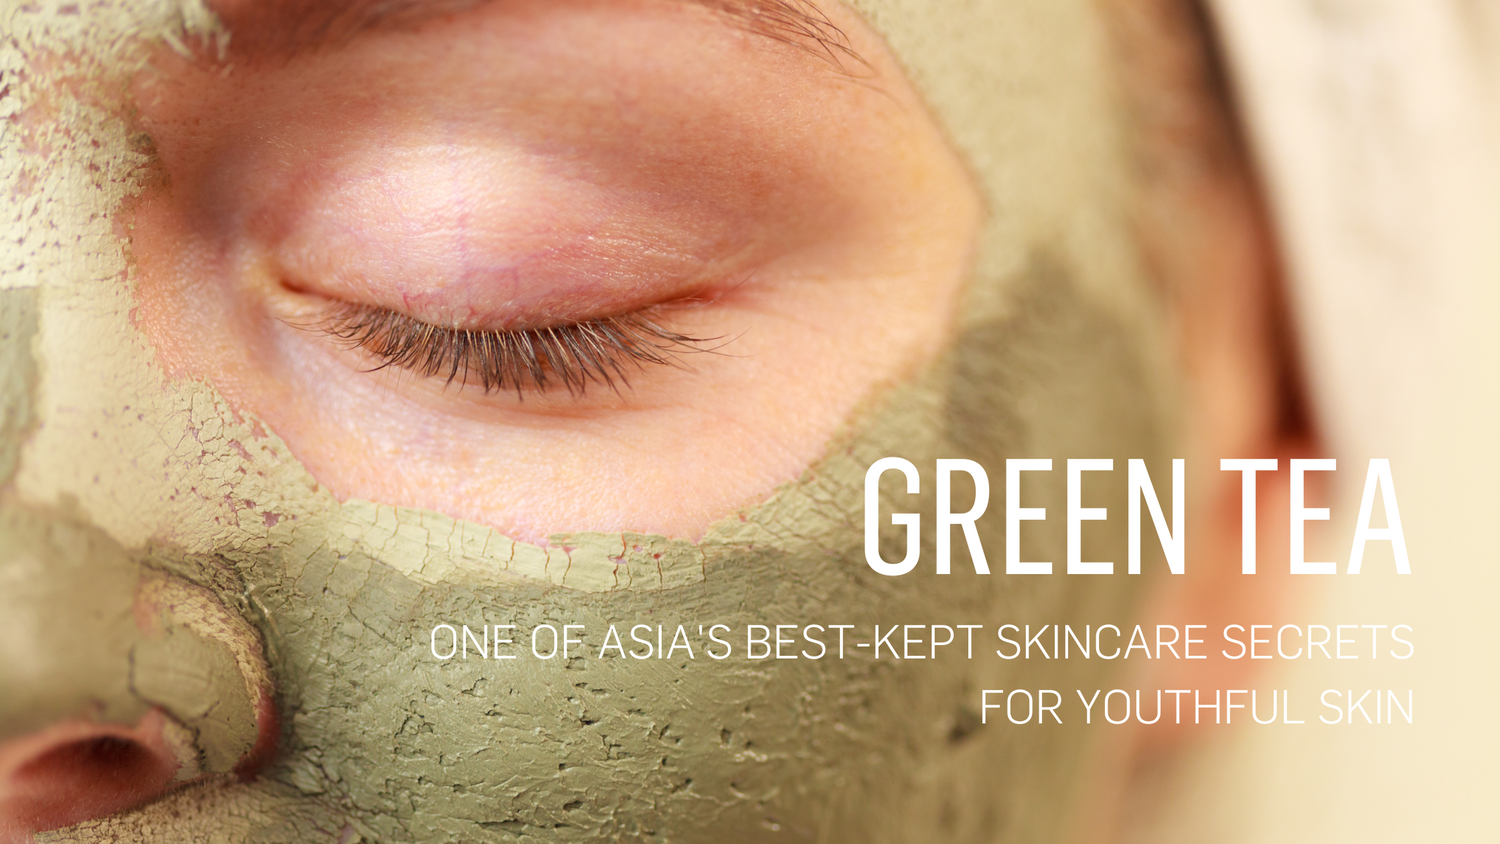 Green Tea - one of Asia's best-kept skincare secrets for youthful skin